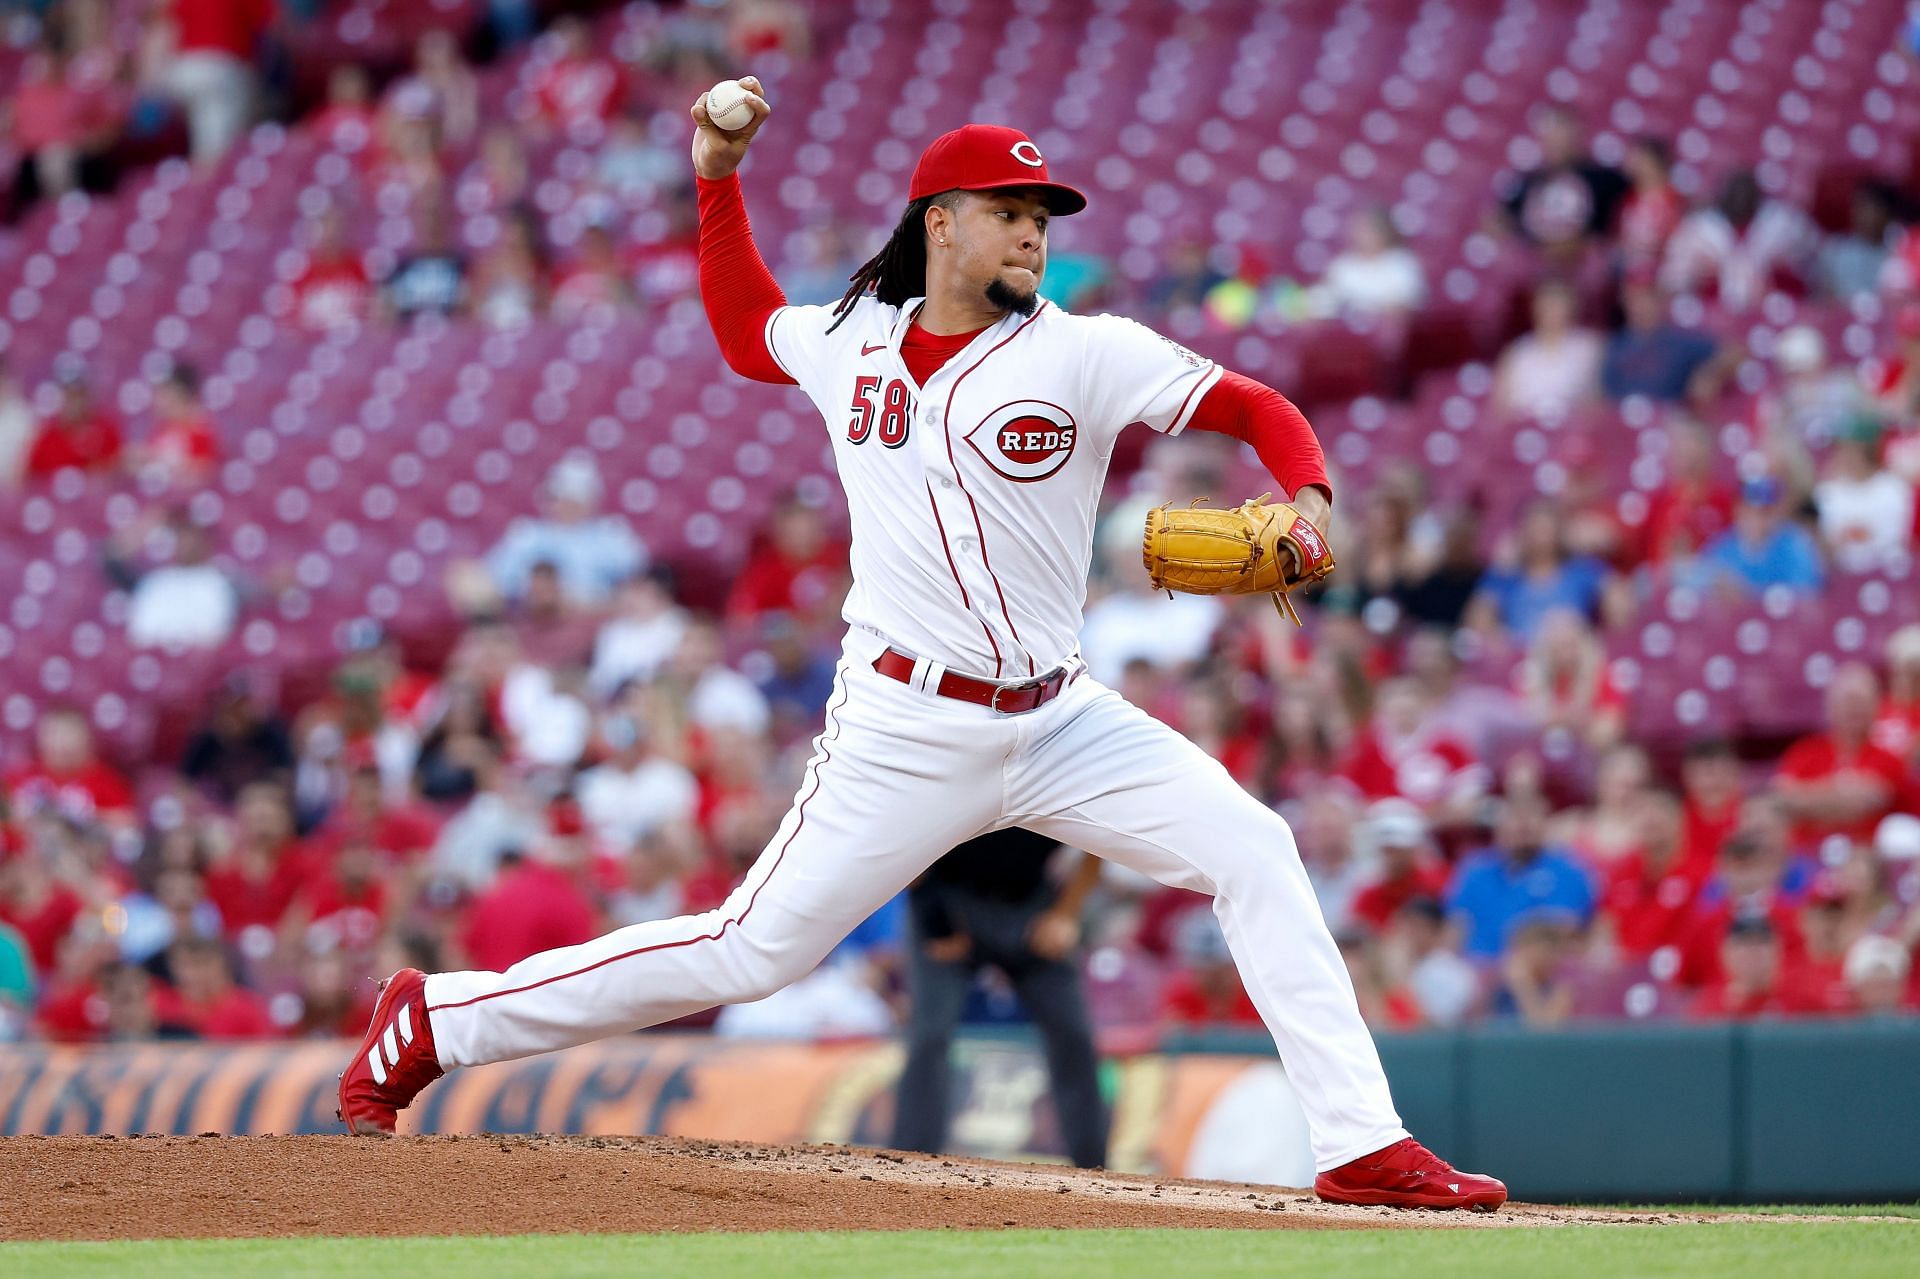 Luis Castillo #58 of the Cincinnati Reds throws a pitch during the second inning of the game against the Miami Marlins at Great American Ball Park on July 27